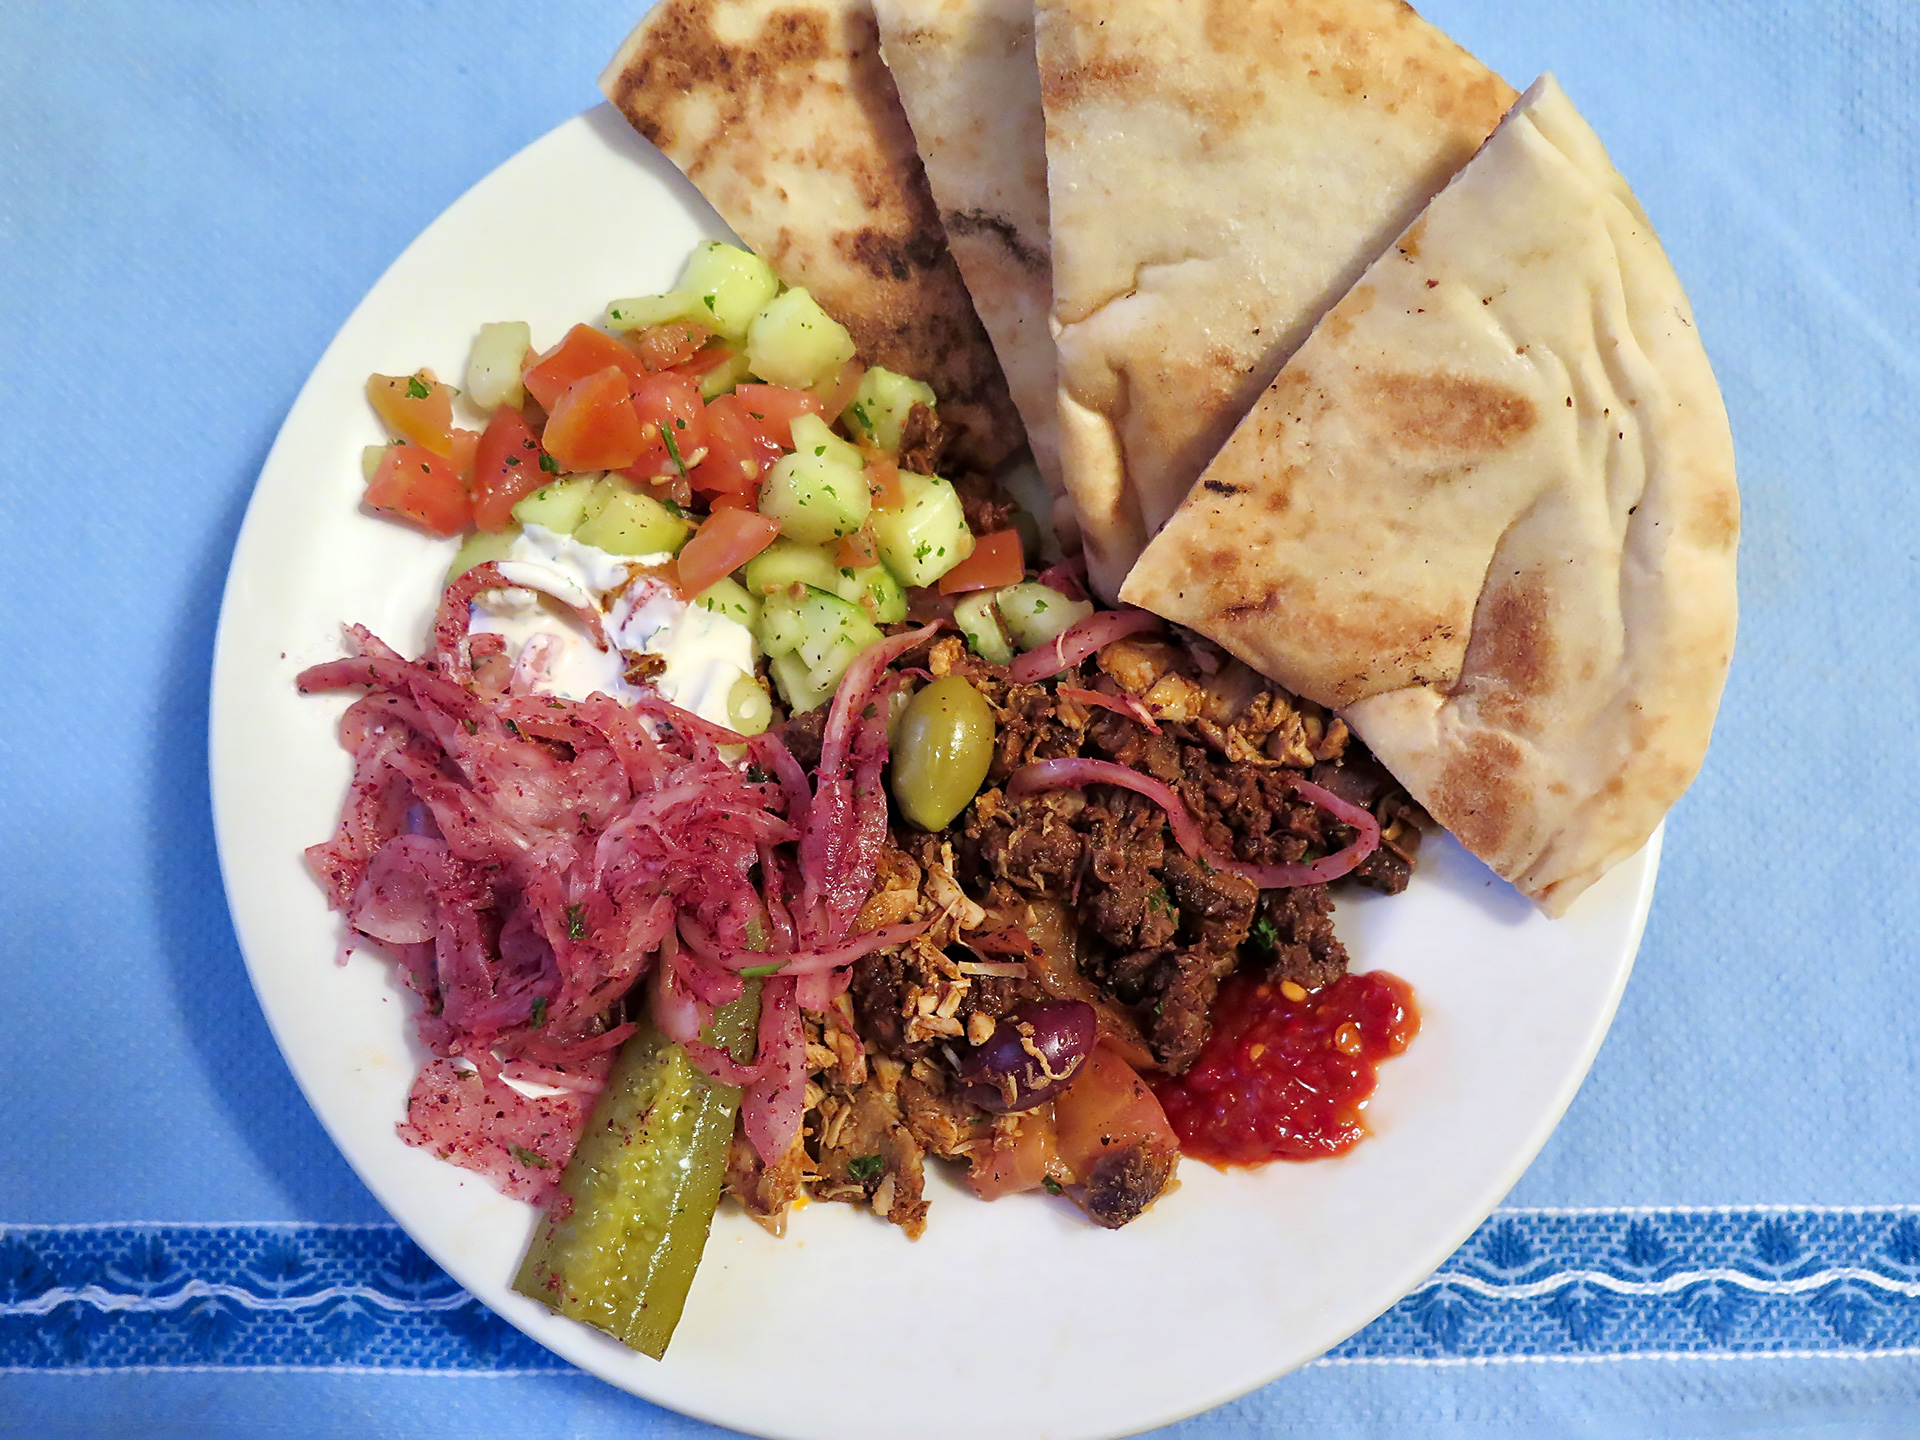 A midweek meal at Zaytoon will fit the bill (and this isn’t even the full portion!). 